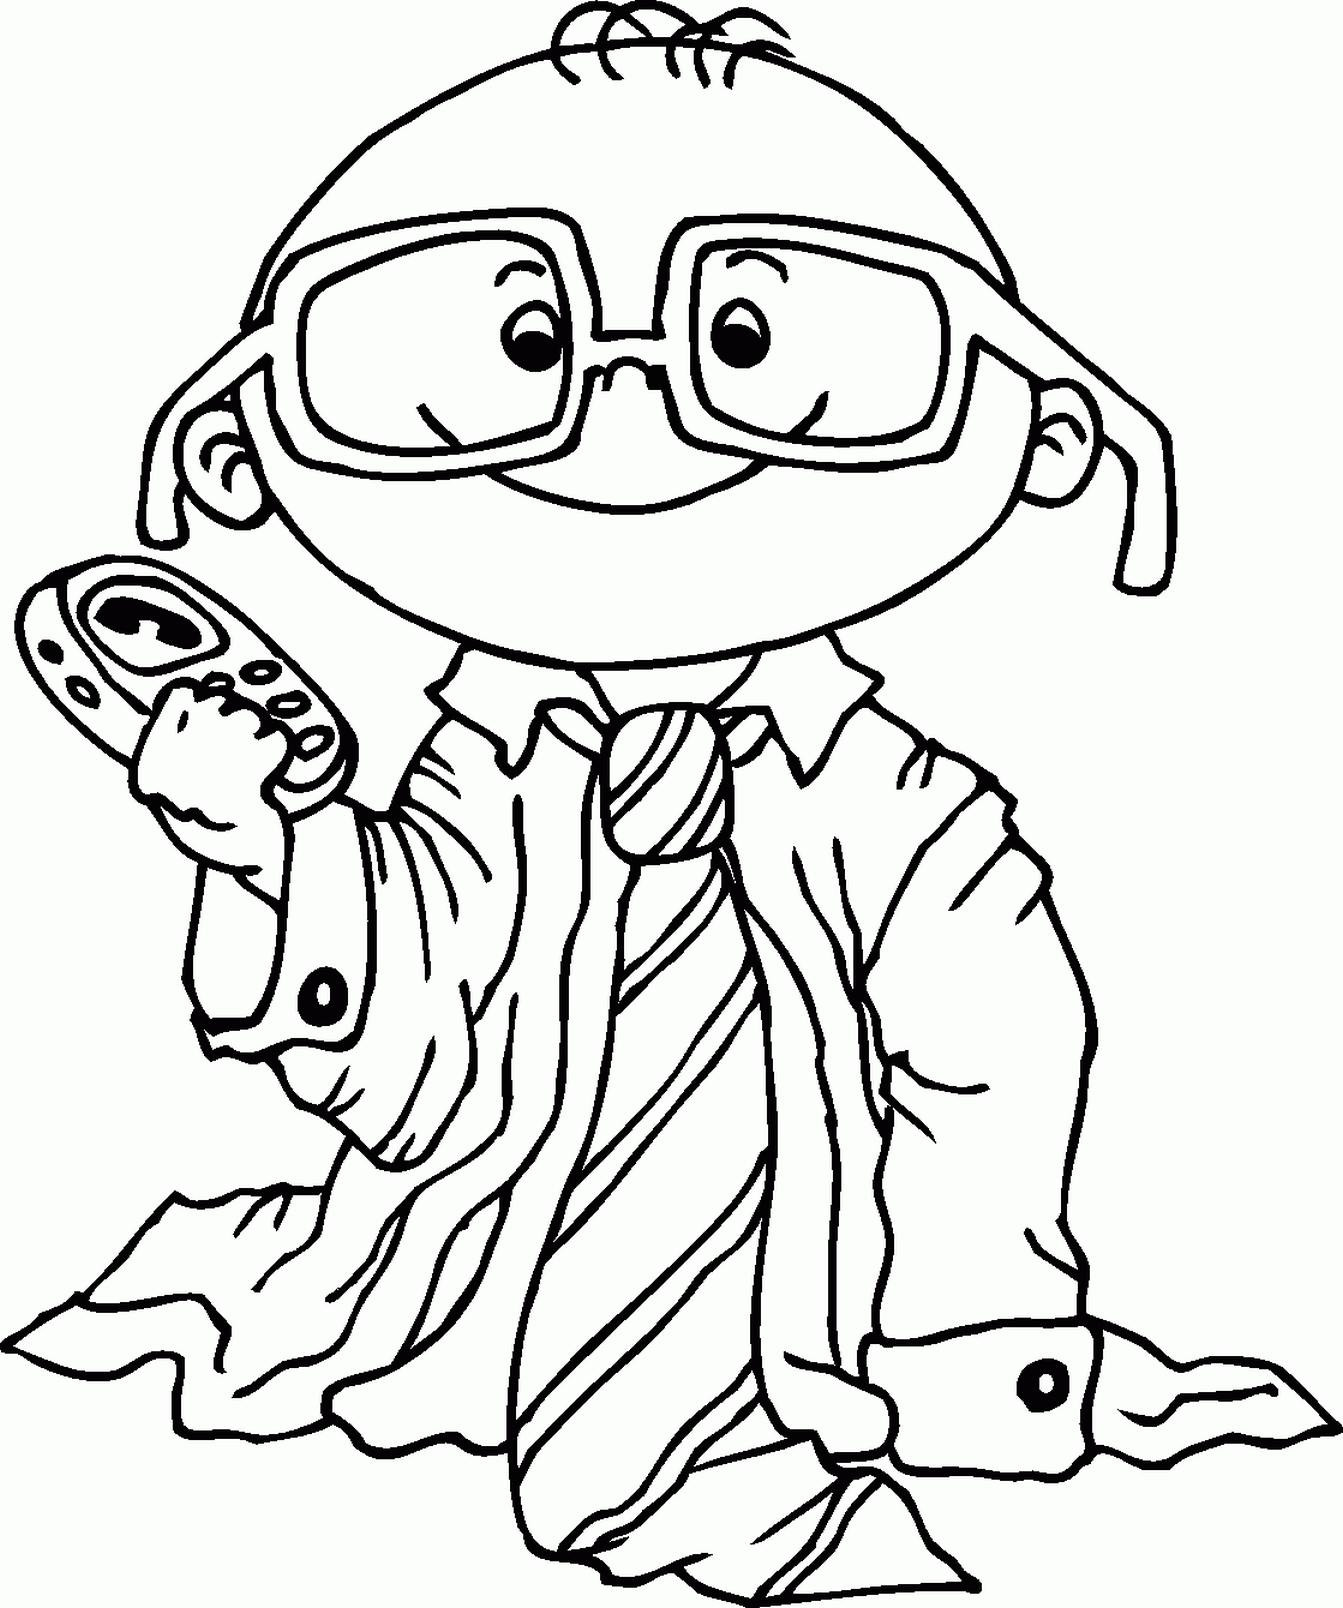 Teen Boys Coloring Pages
 Coloring Pages For Teen Boys Coloring Home